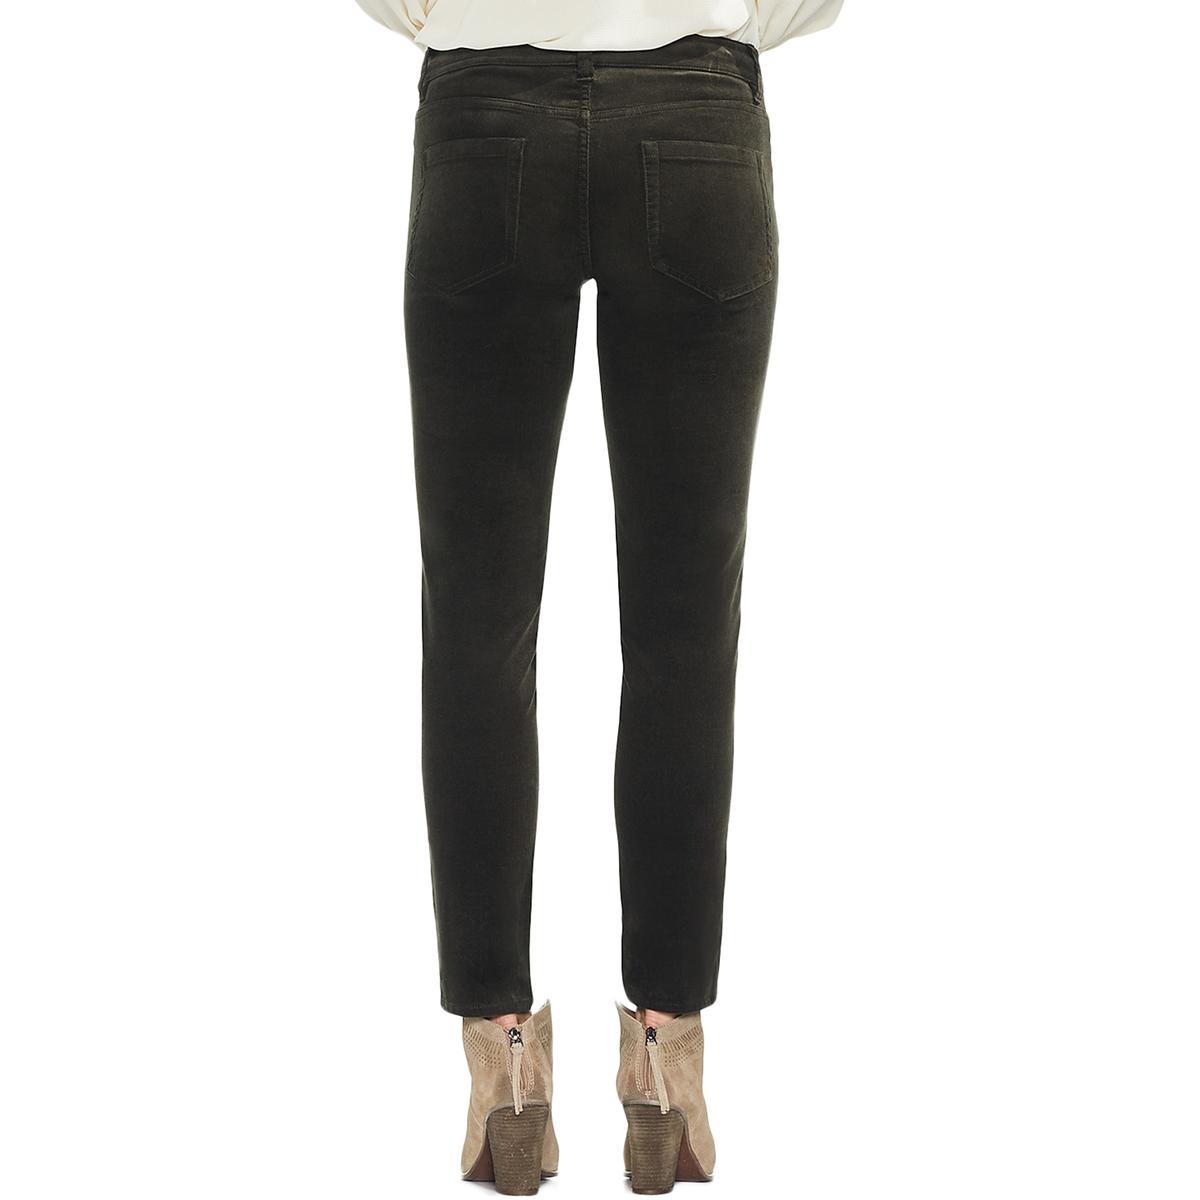 Vince Camuto Womens Corduroy Mid-Rise Casual Skinny Pants BHFO 9789